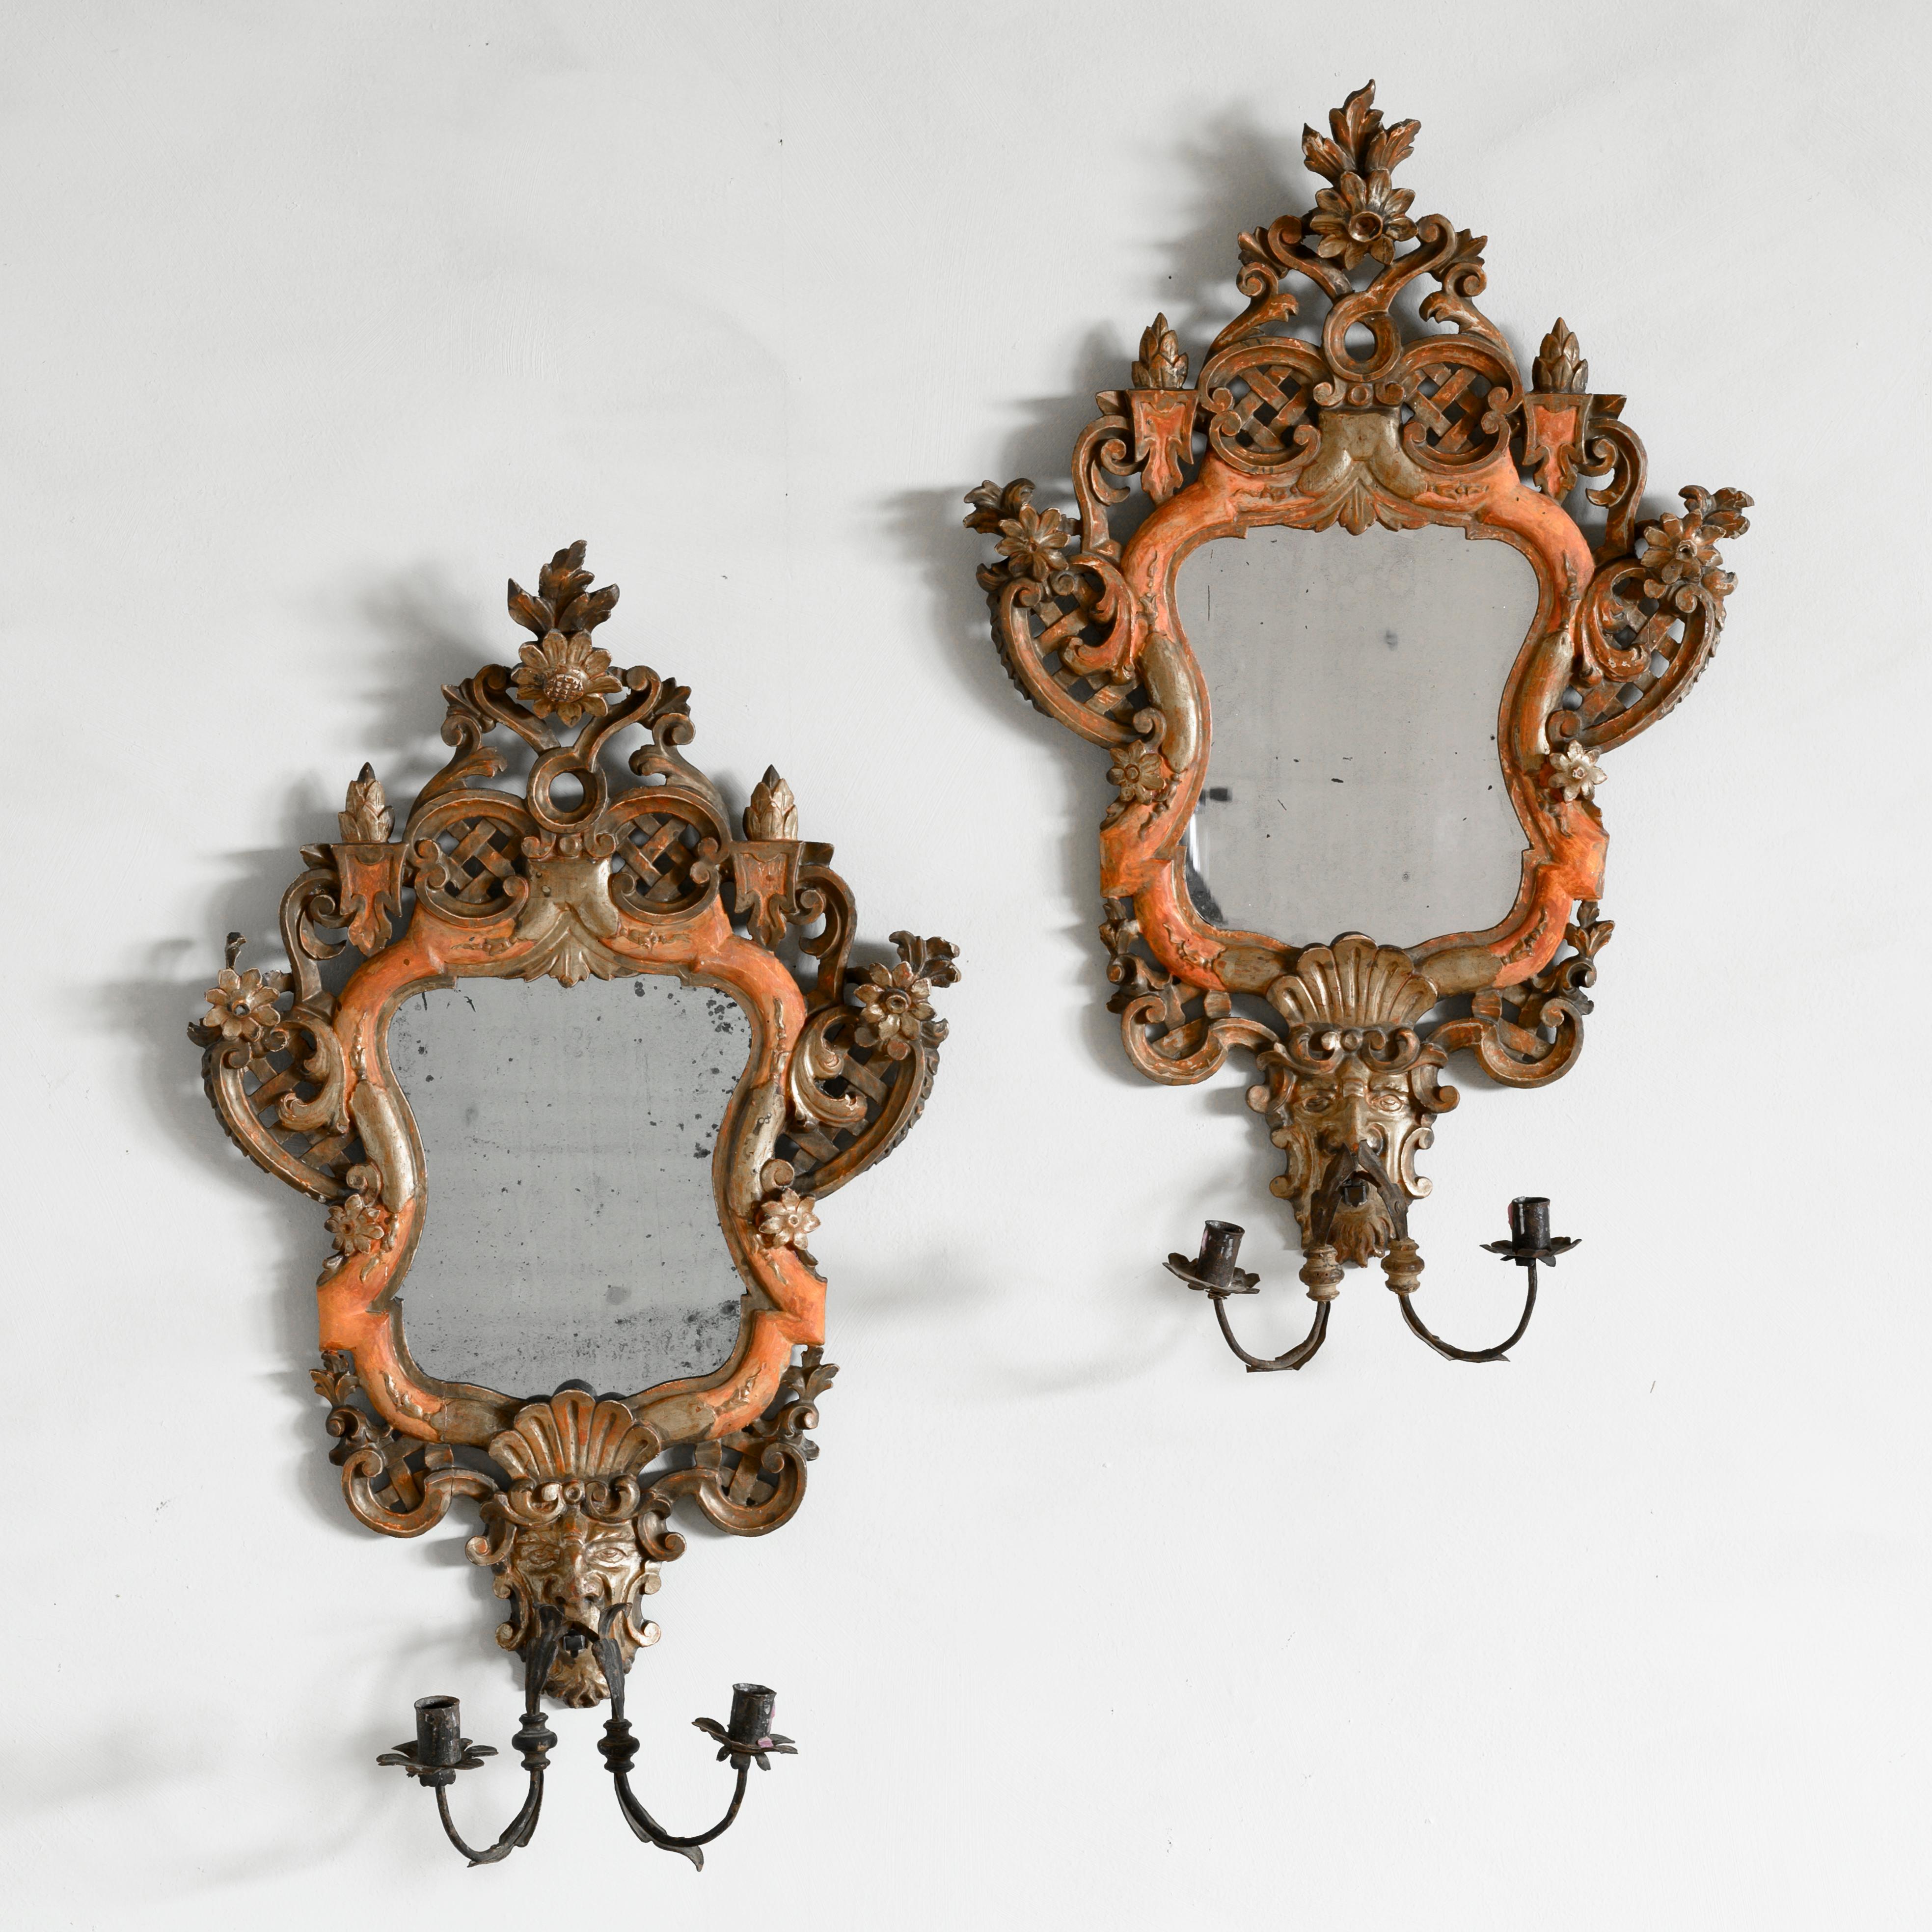 Pair of 18th-century giltwood Venitian mirror sconces with Fine carvings and patination, circa 1770 Italy.